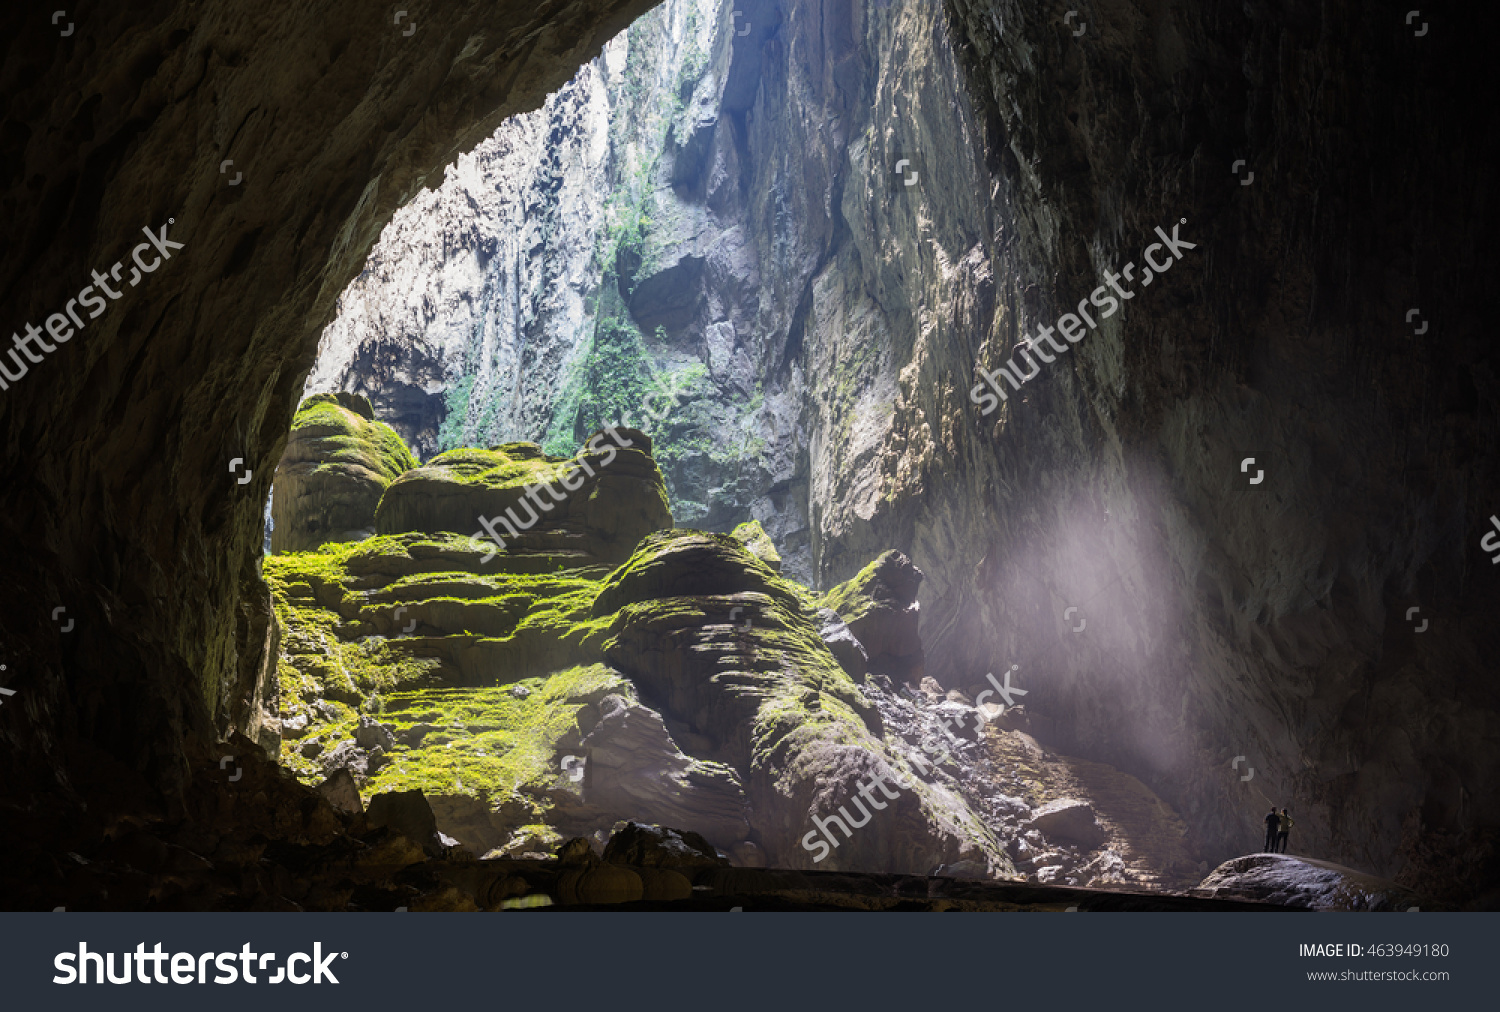 Son Doong Cave clipart #14, Download drawings